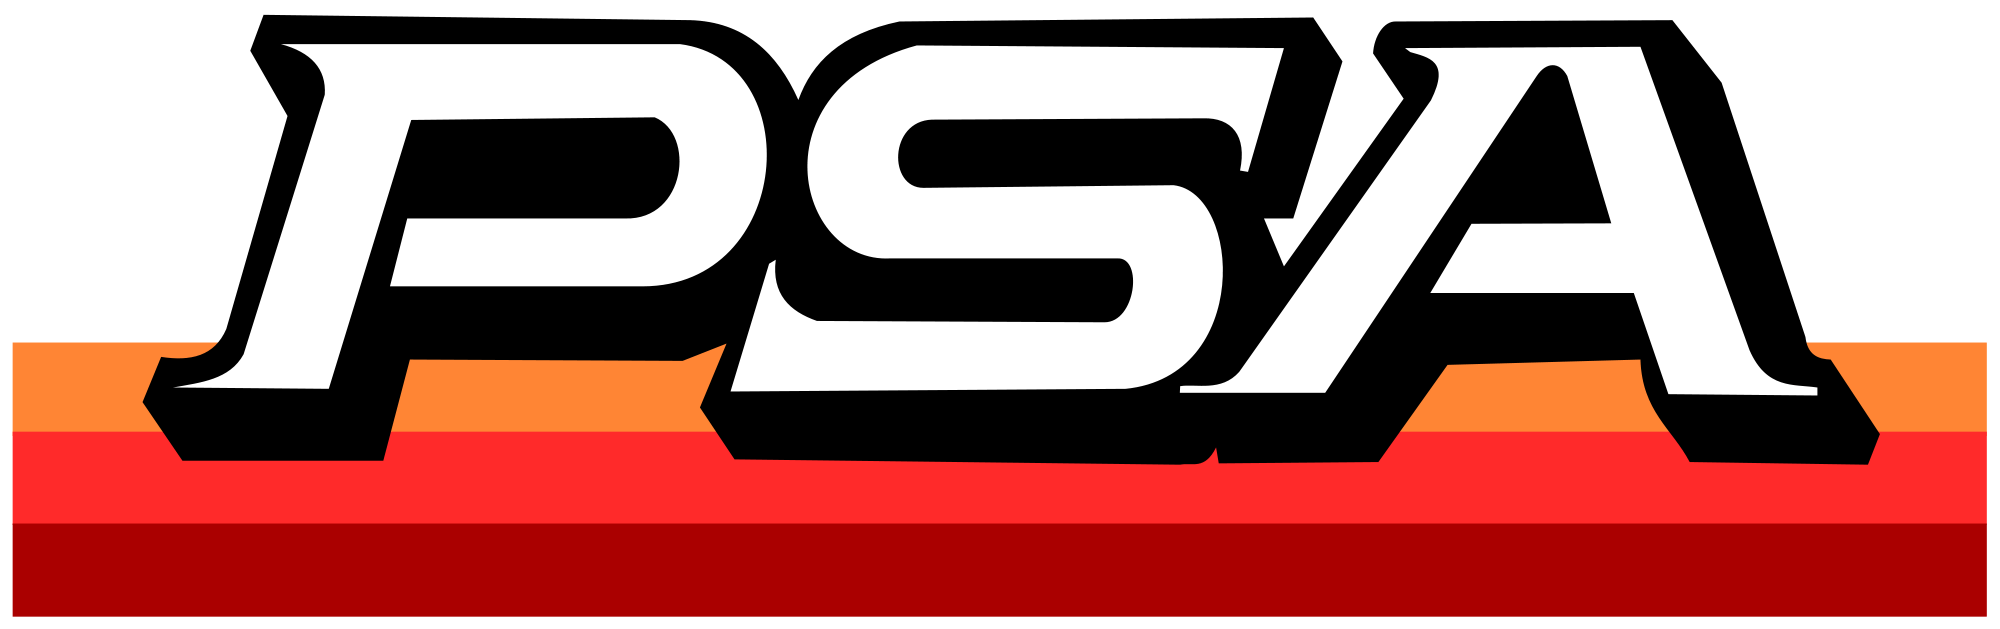 South West Airlines Logo - File:PSA Airlines Logo.svg - Wikimedia Commons